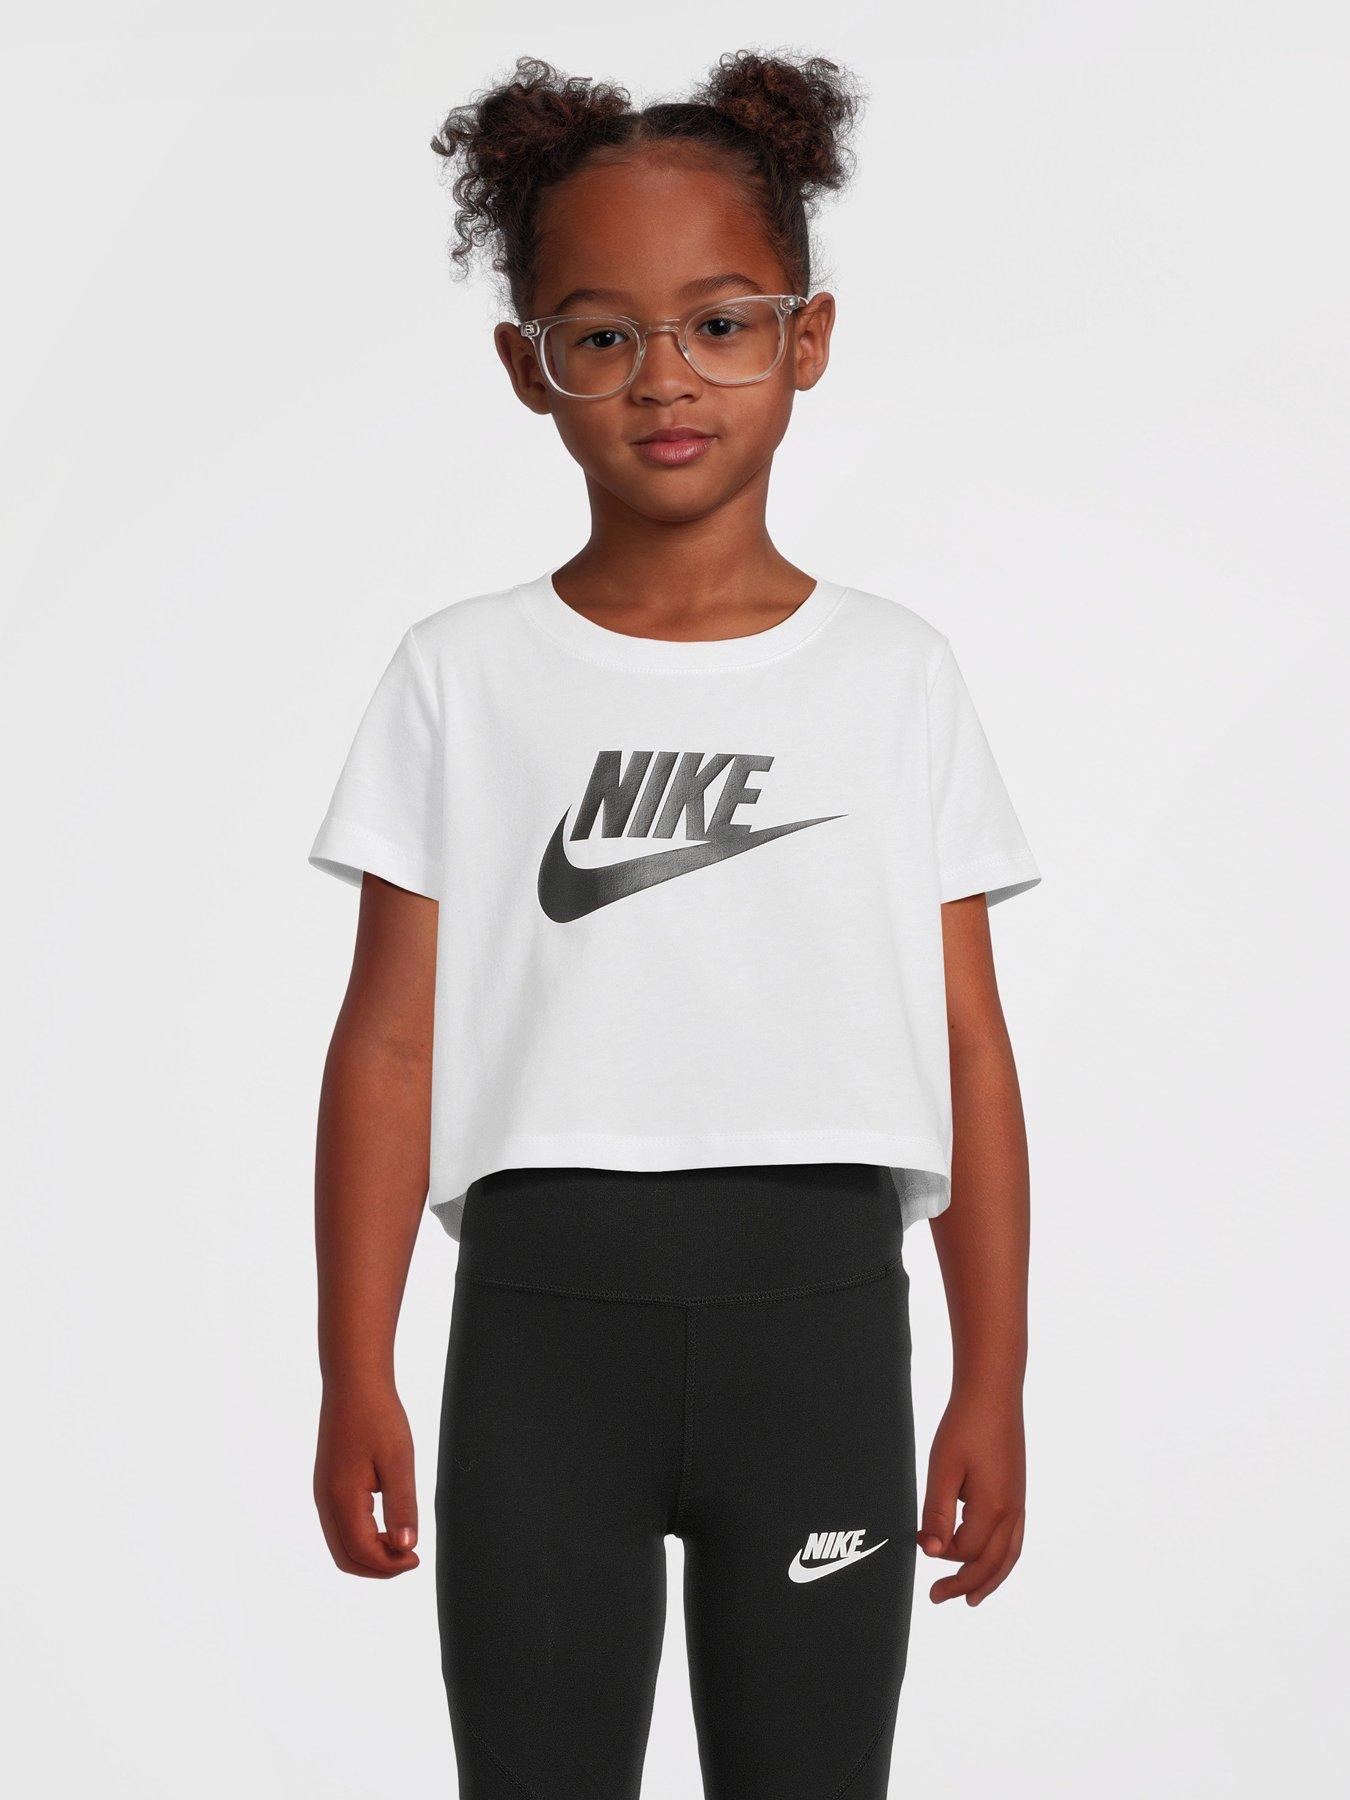 Girls Nike clothes | Nike Girls Clothes 